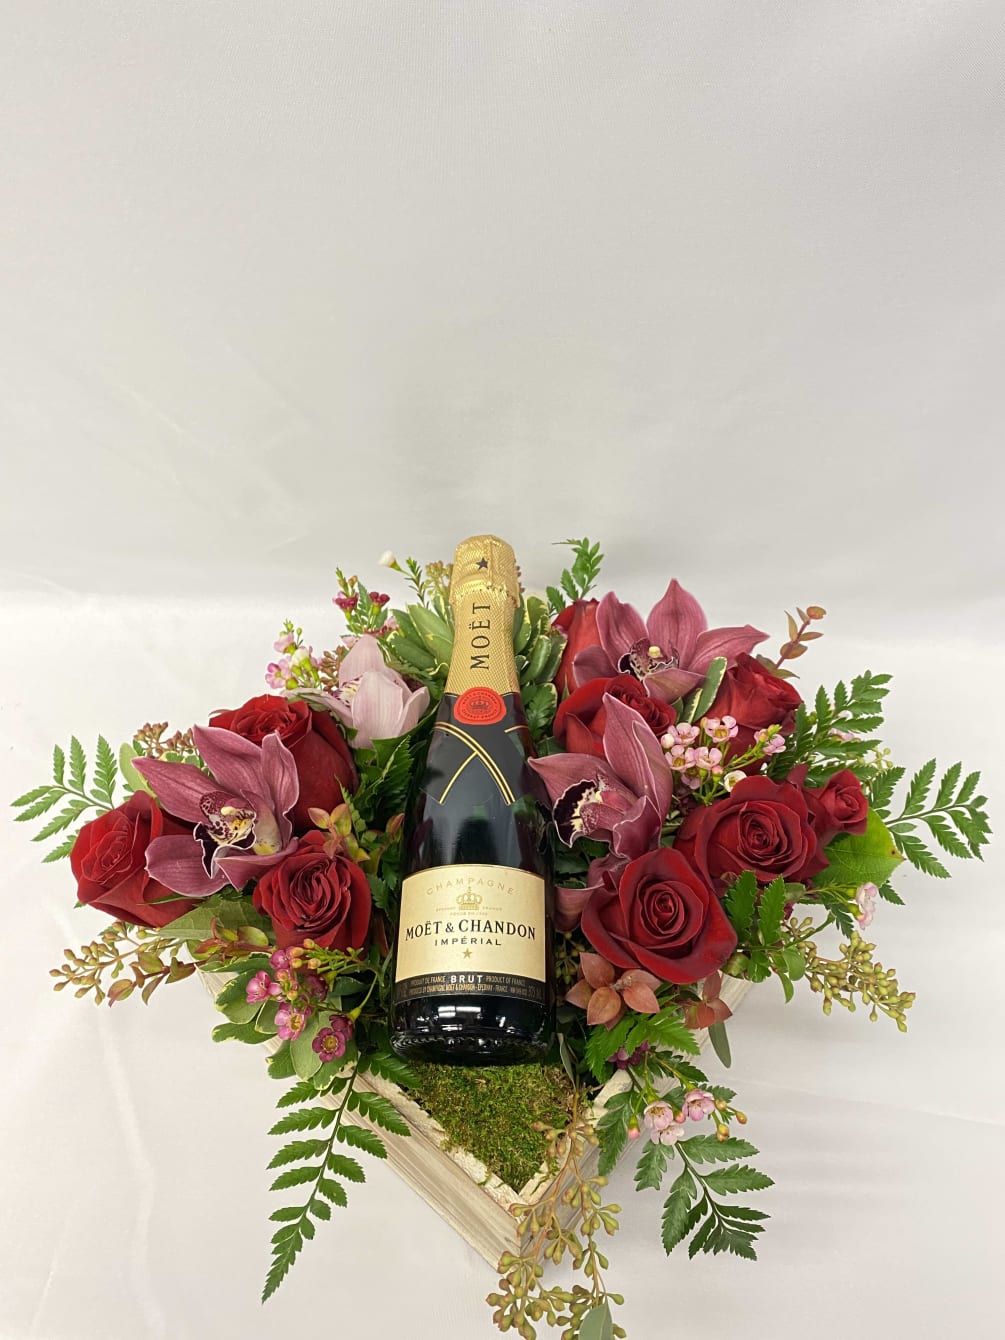 A classic romantic combination. This arrangement includes red roses and orchids along